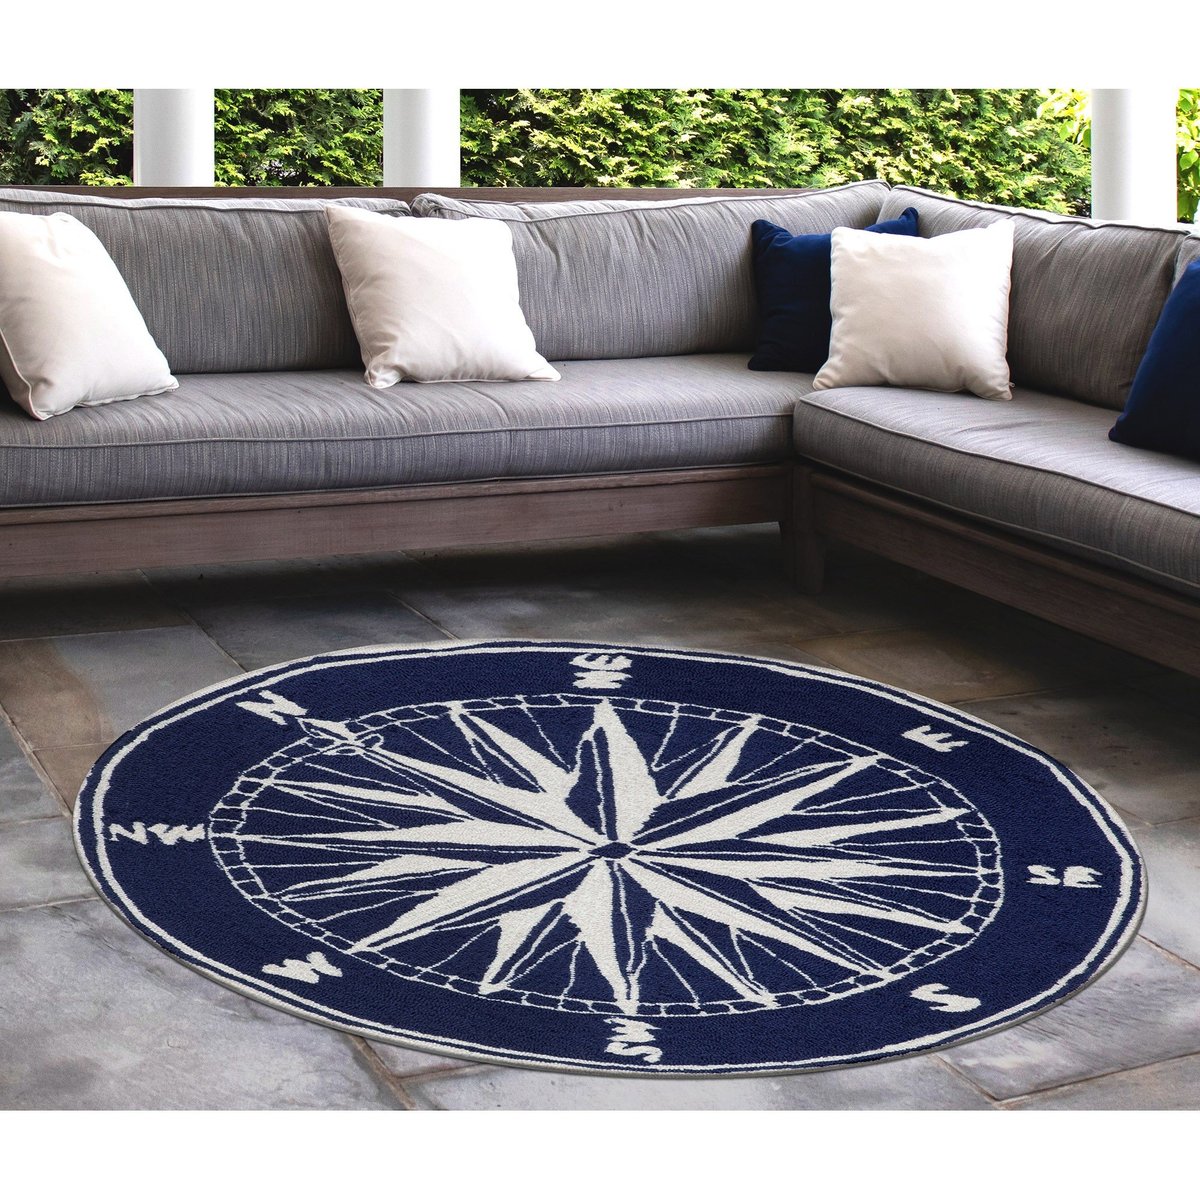 Liora Manne Front Porch Compass Rugs, Nautical Area Rug